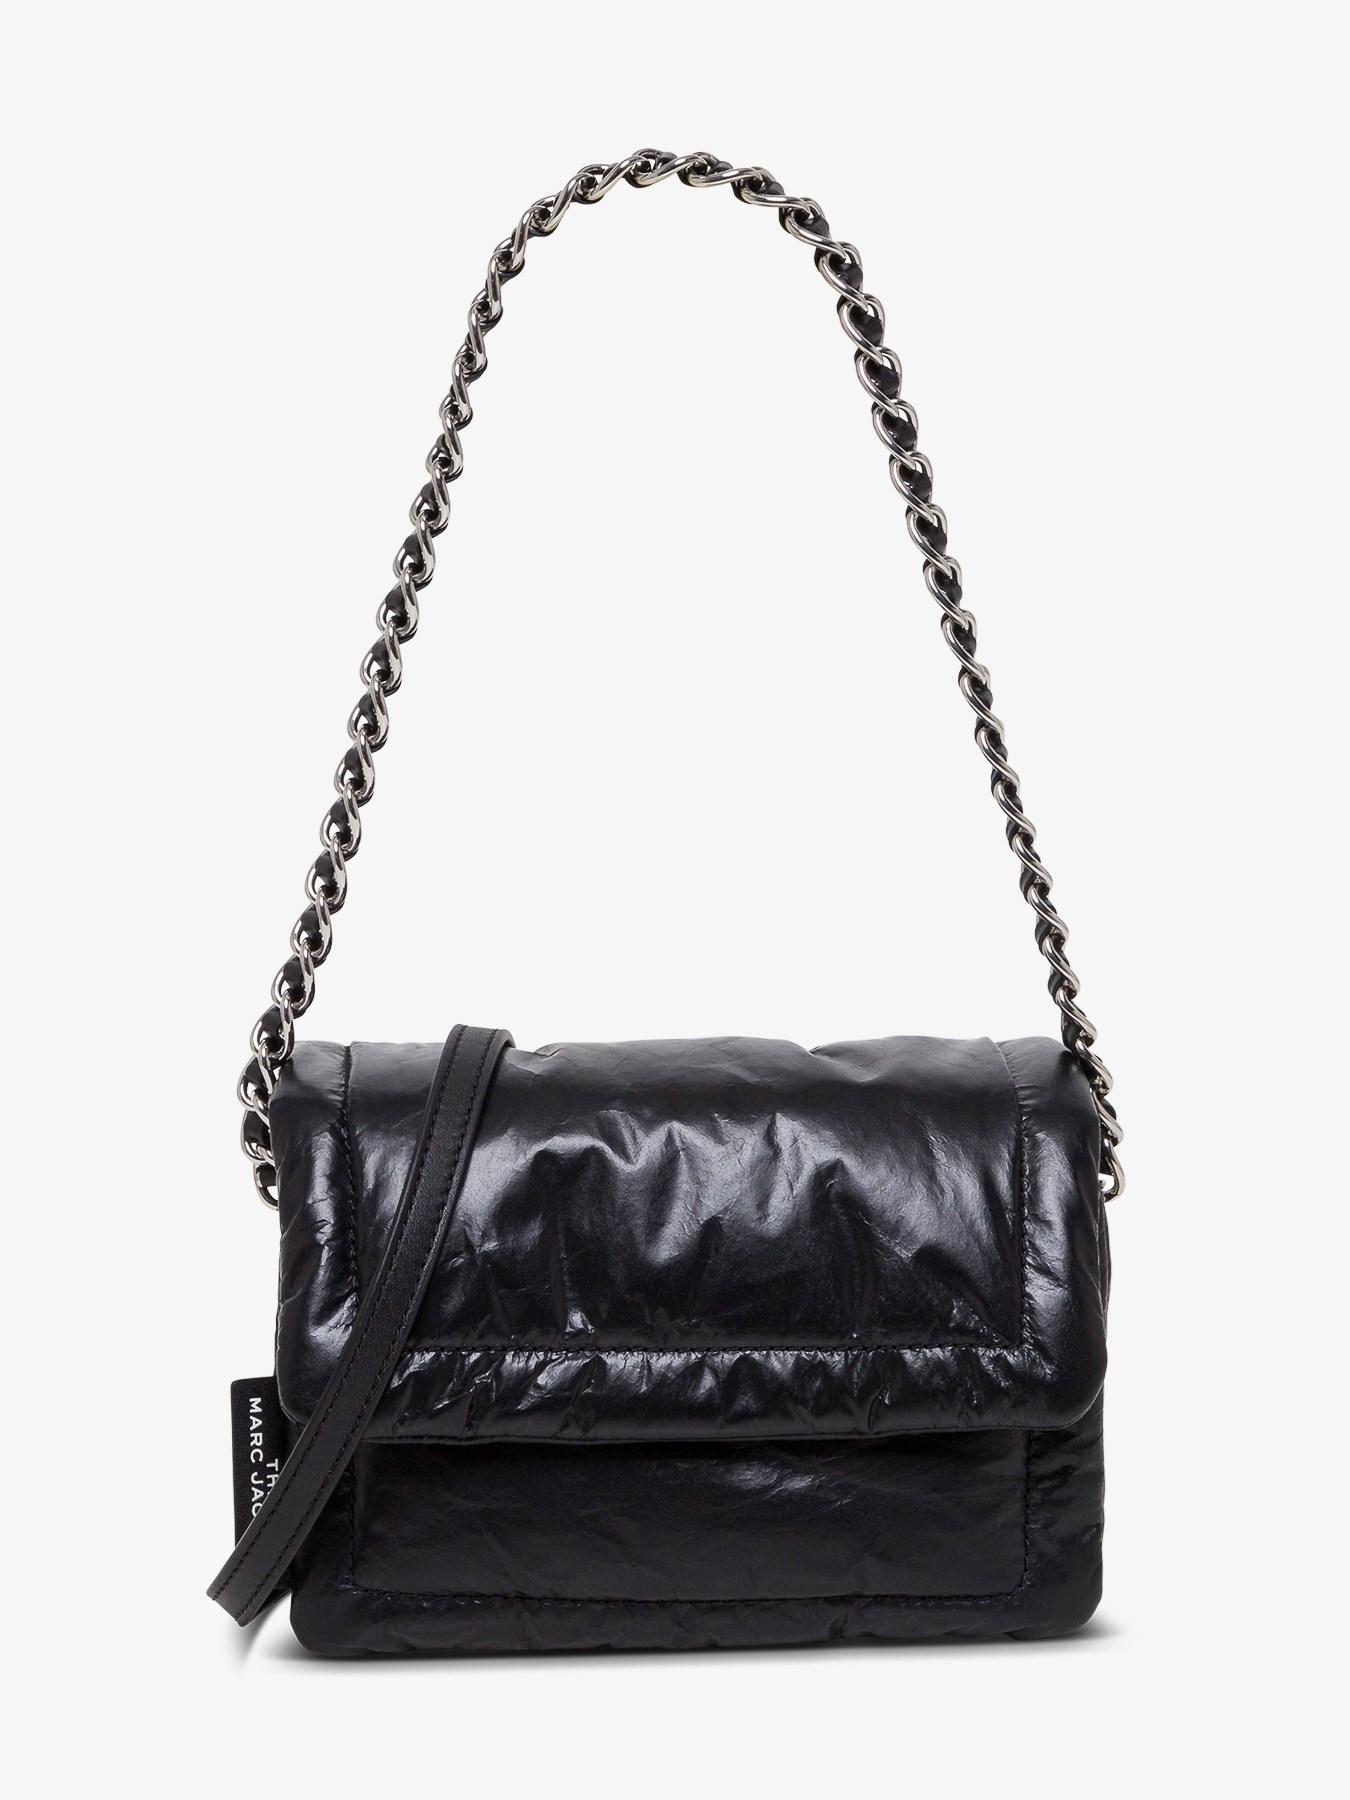 Marc Jacobs Leather The Mini Pillow Bag in Black - Save 68% - Lyst